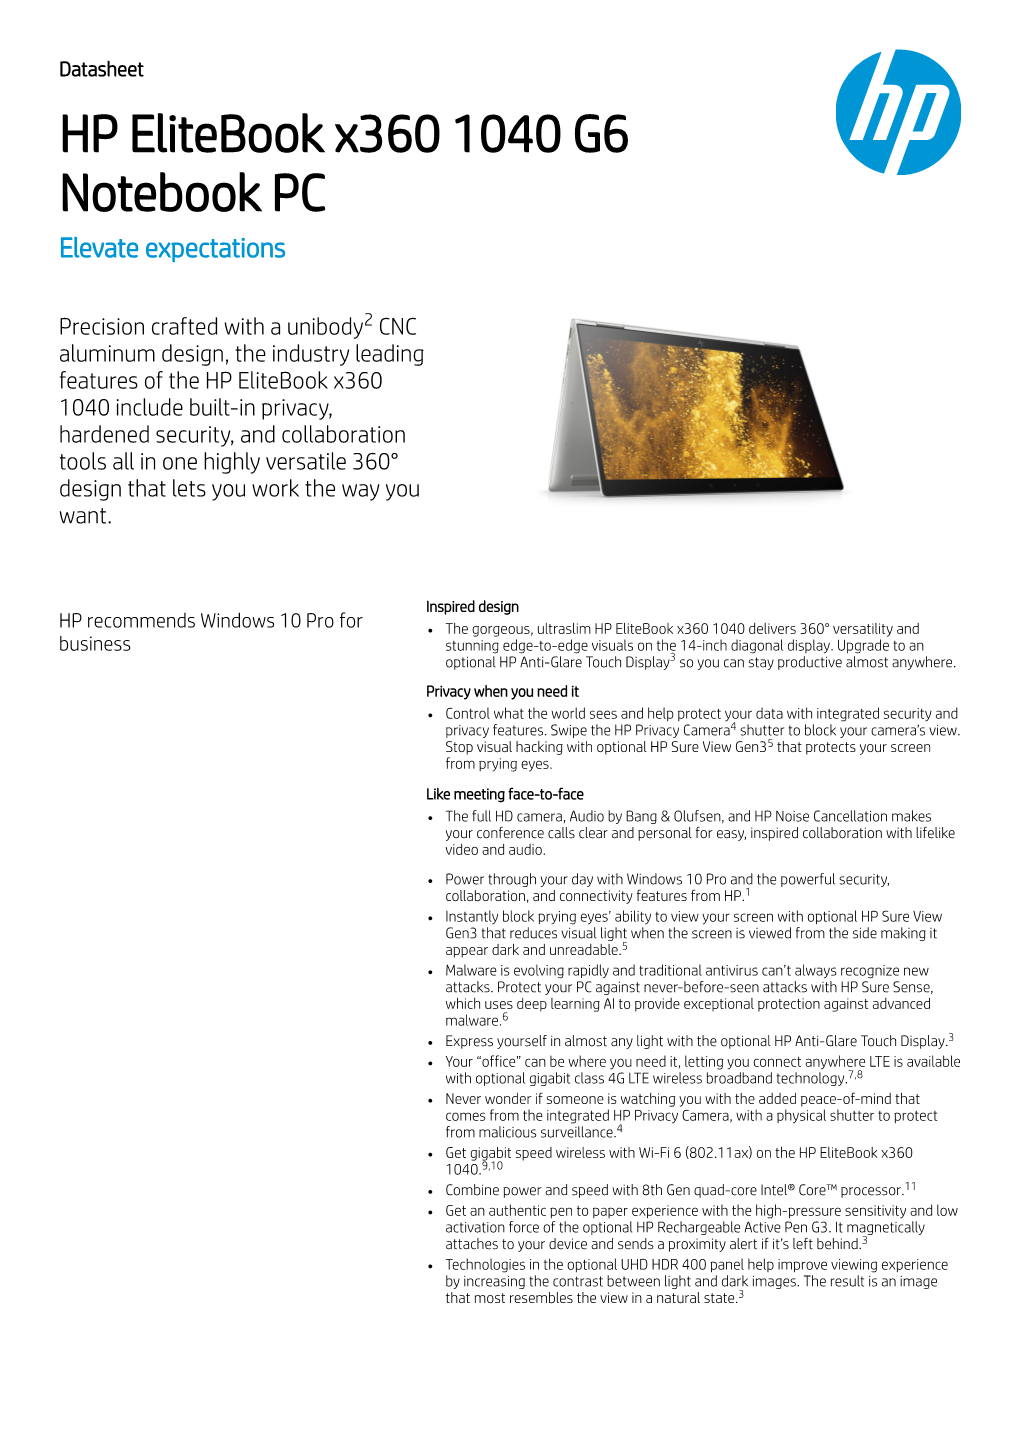 HP Elitebook X360 1040 G6 Notebook PC Elevate Expectations